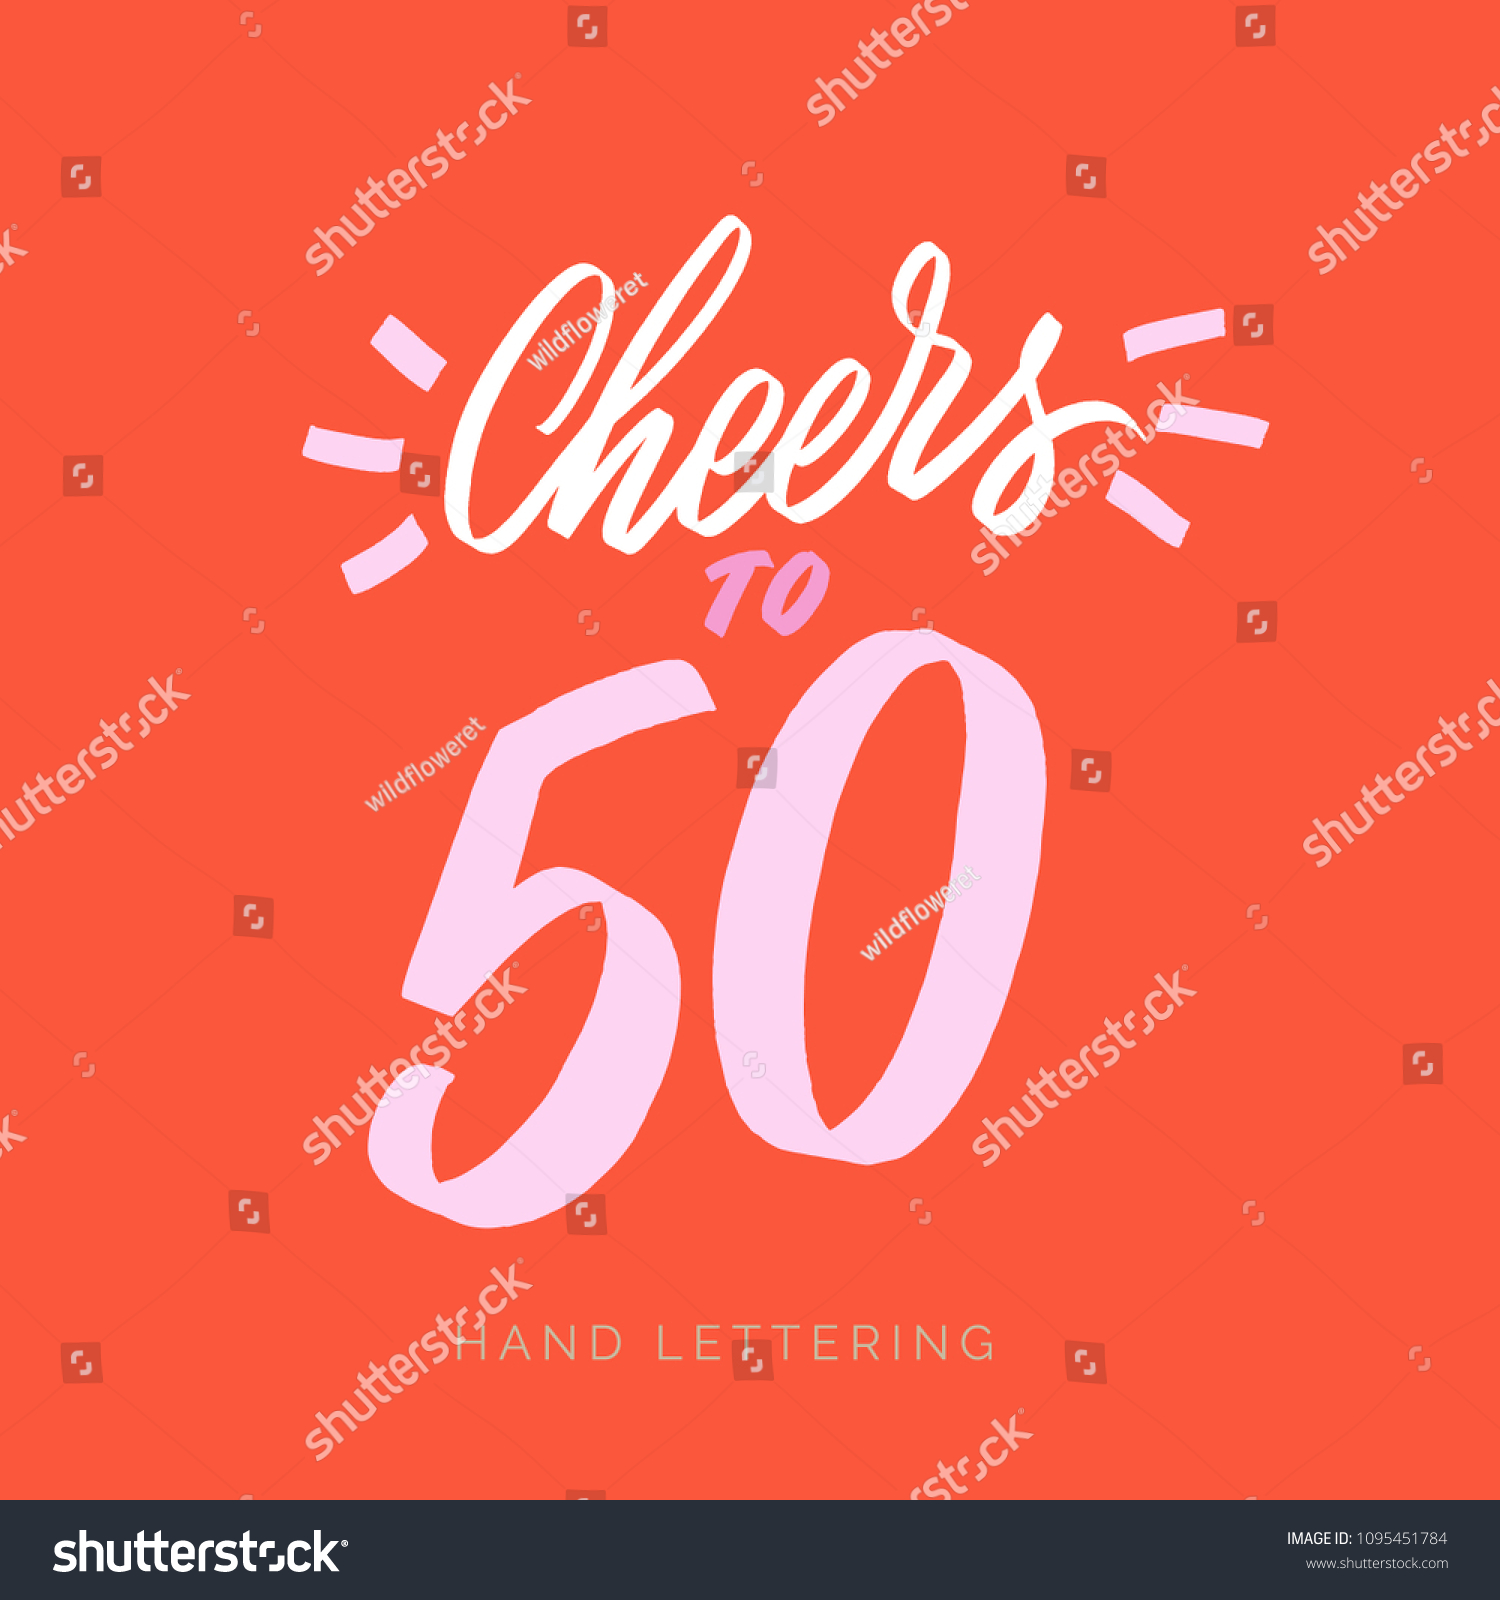 SVG of Cheers to 50. Fun Happy birthday card idea. Hand drawn concept for your design. Custom typography and modern hand lettering. Can be printed on cards, apparel, cups, bags, etc. svg